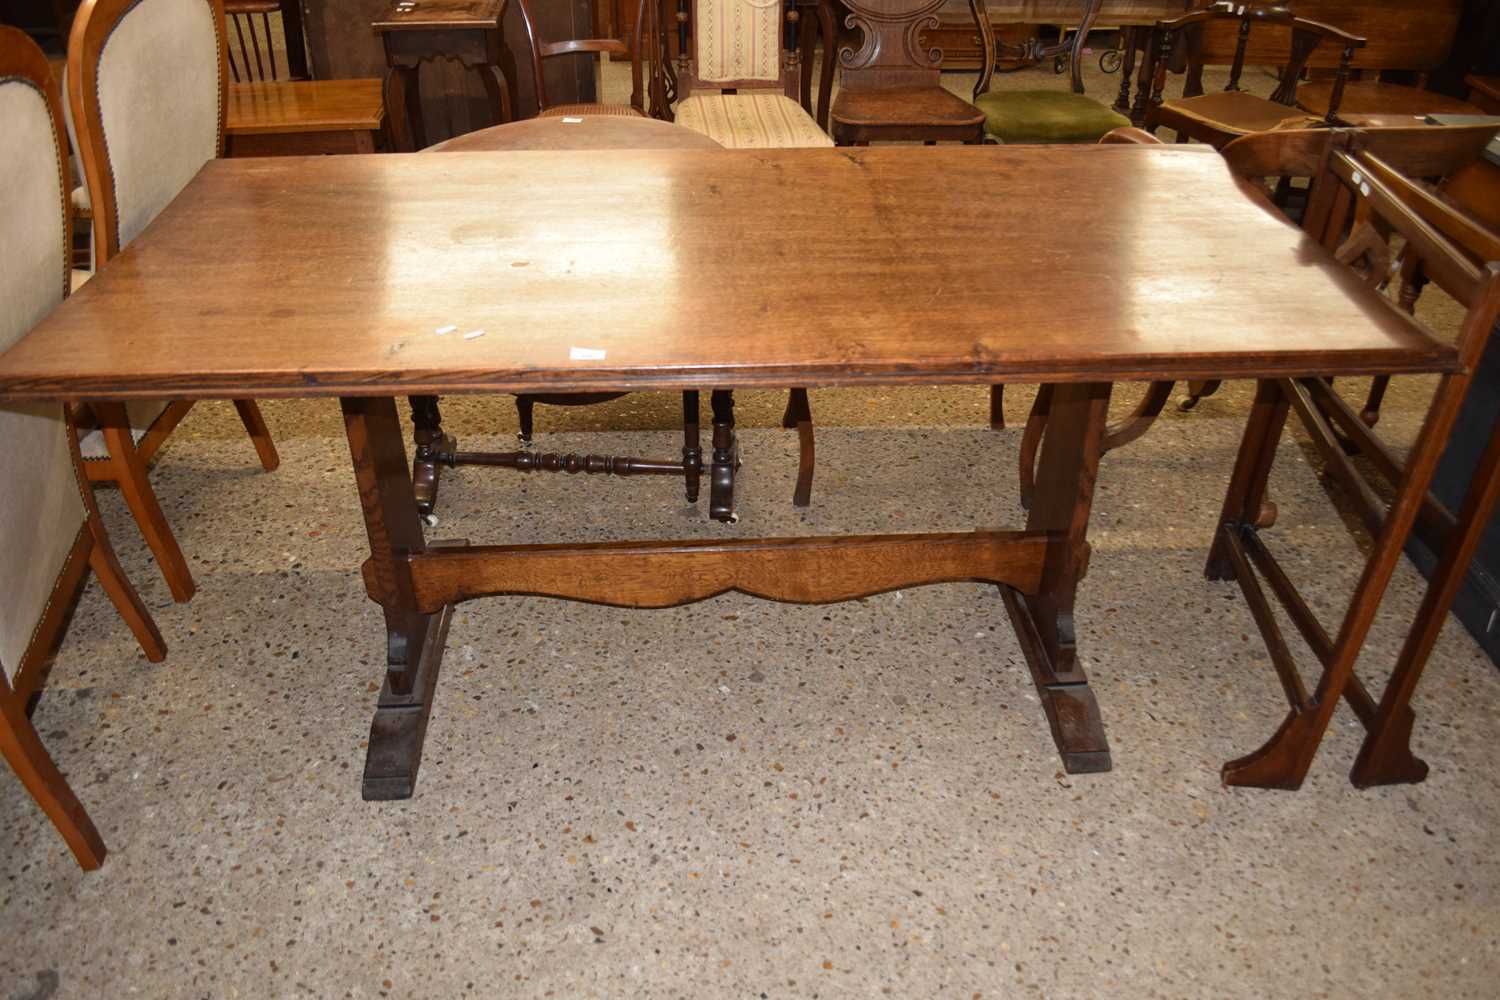 A 20th Century oak refectory dining table, 171cm wide